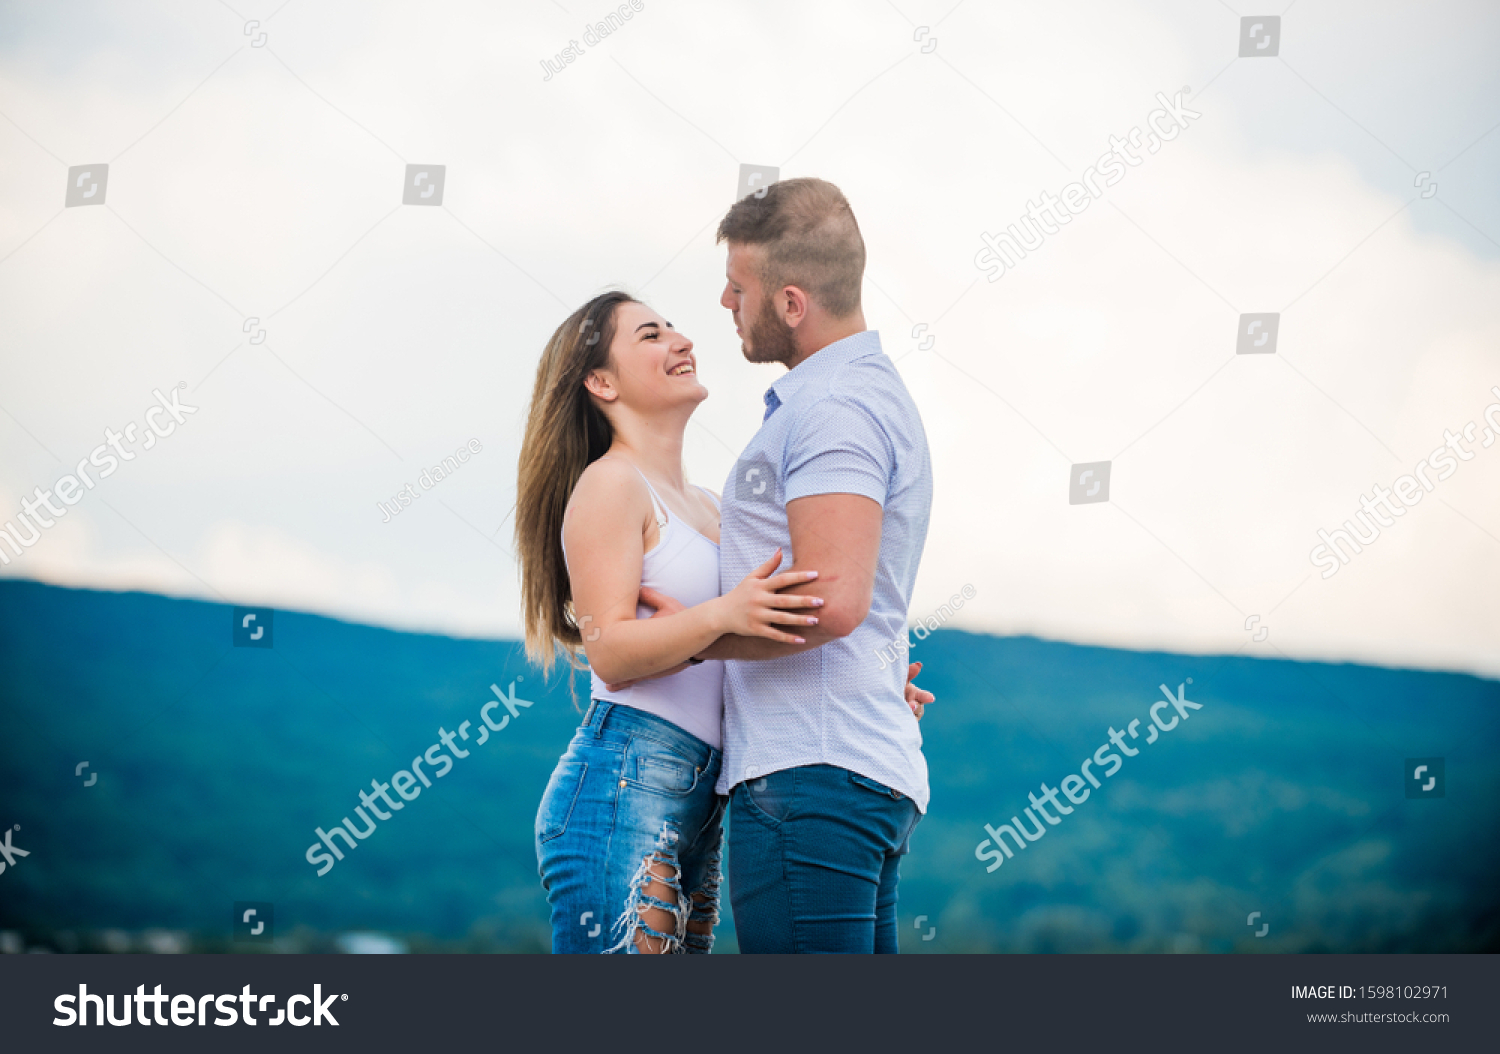 Supporting her. Cute relationship. Man and woman cuddle nature background. Together forever. Love story. Just married. Honeymoon concept. Romantic relations. True love. Family love. Couple in love. #1598102971